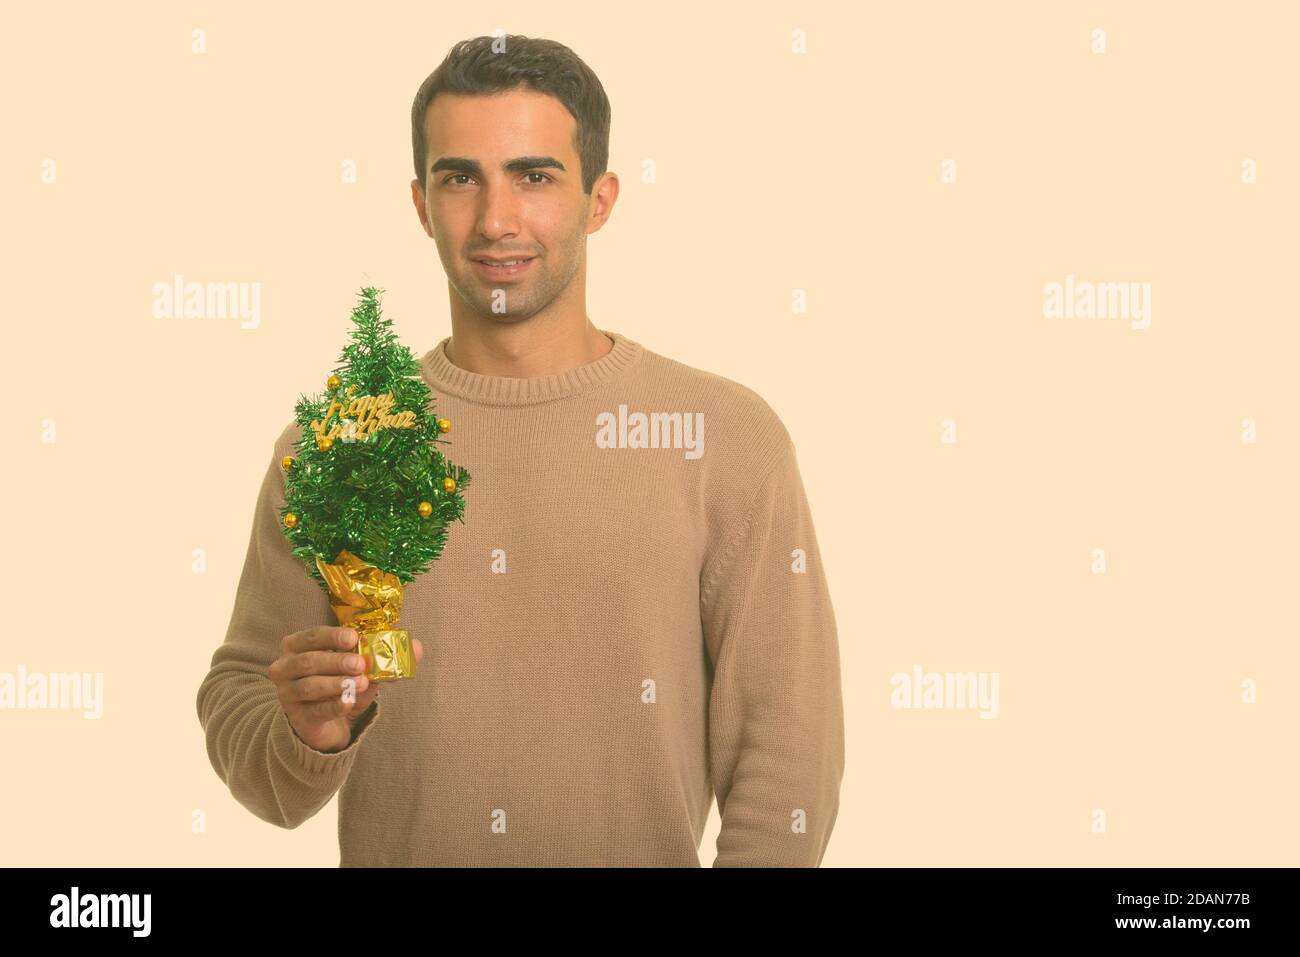 Young happy Iranian man holding Merry Christmas tree ready for Christmas Stock Photo